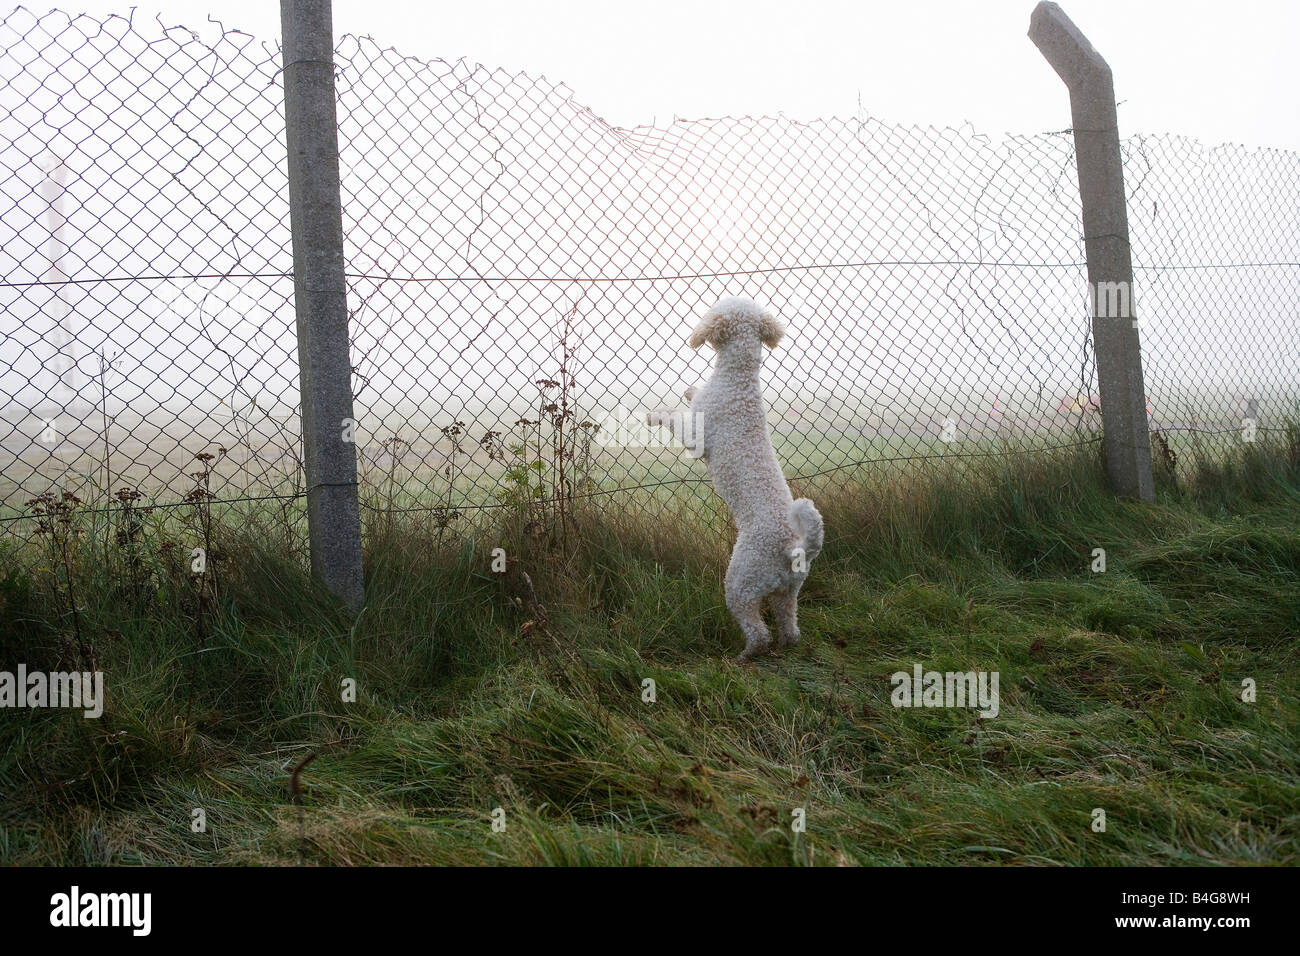 A Spanish Water Dog rearing up and leaning on a fence Stock Photo